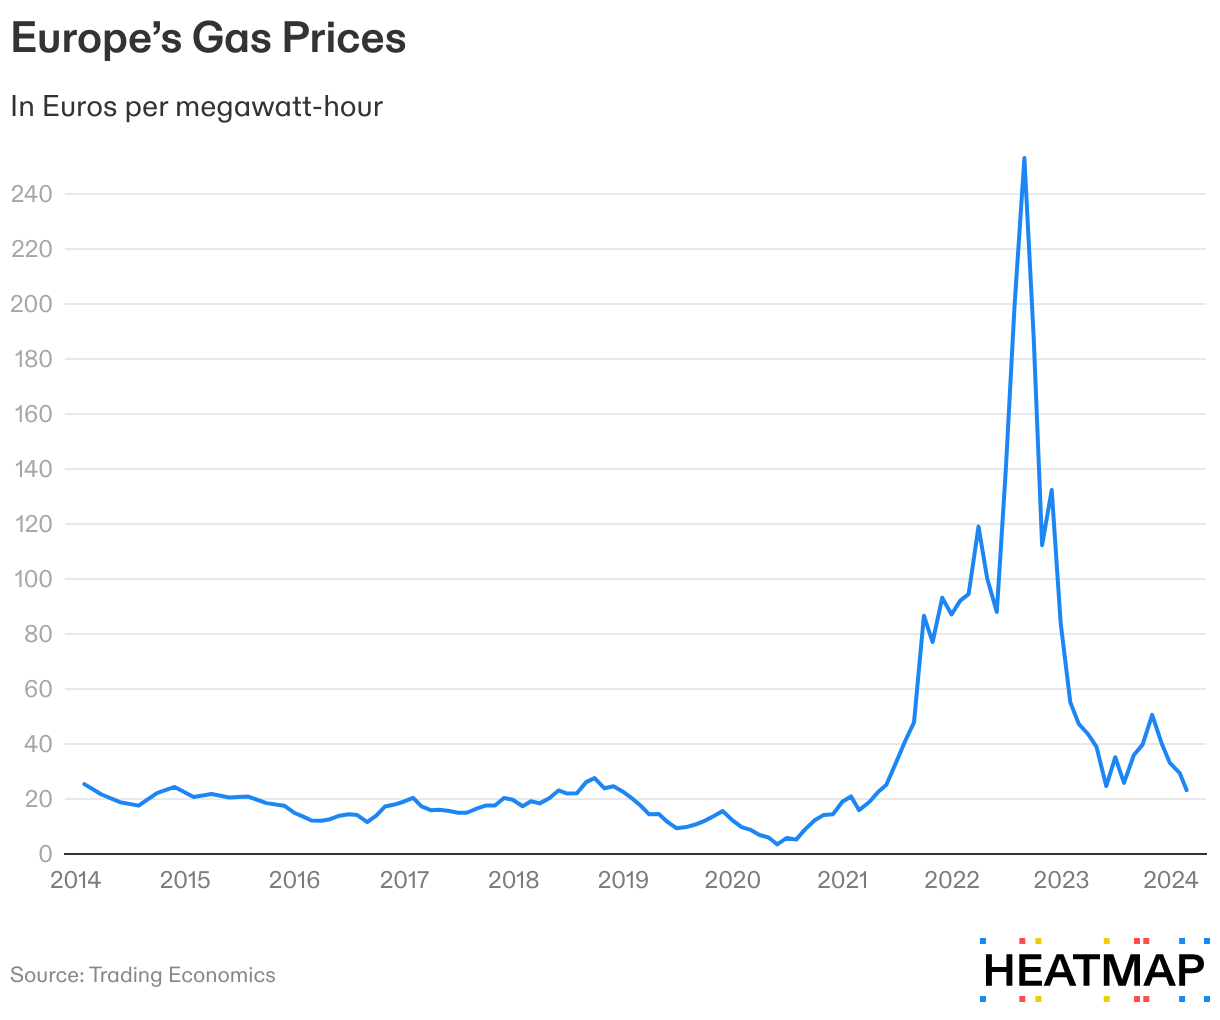 A chart of Europe's gas prices from 2014 to 2024